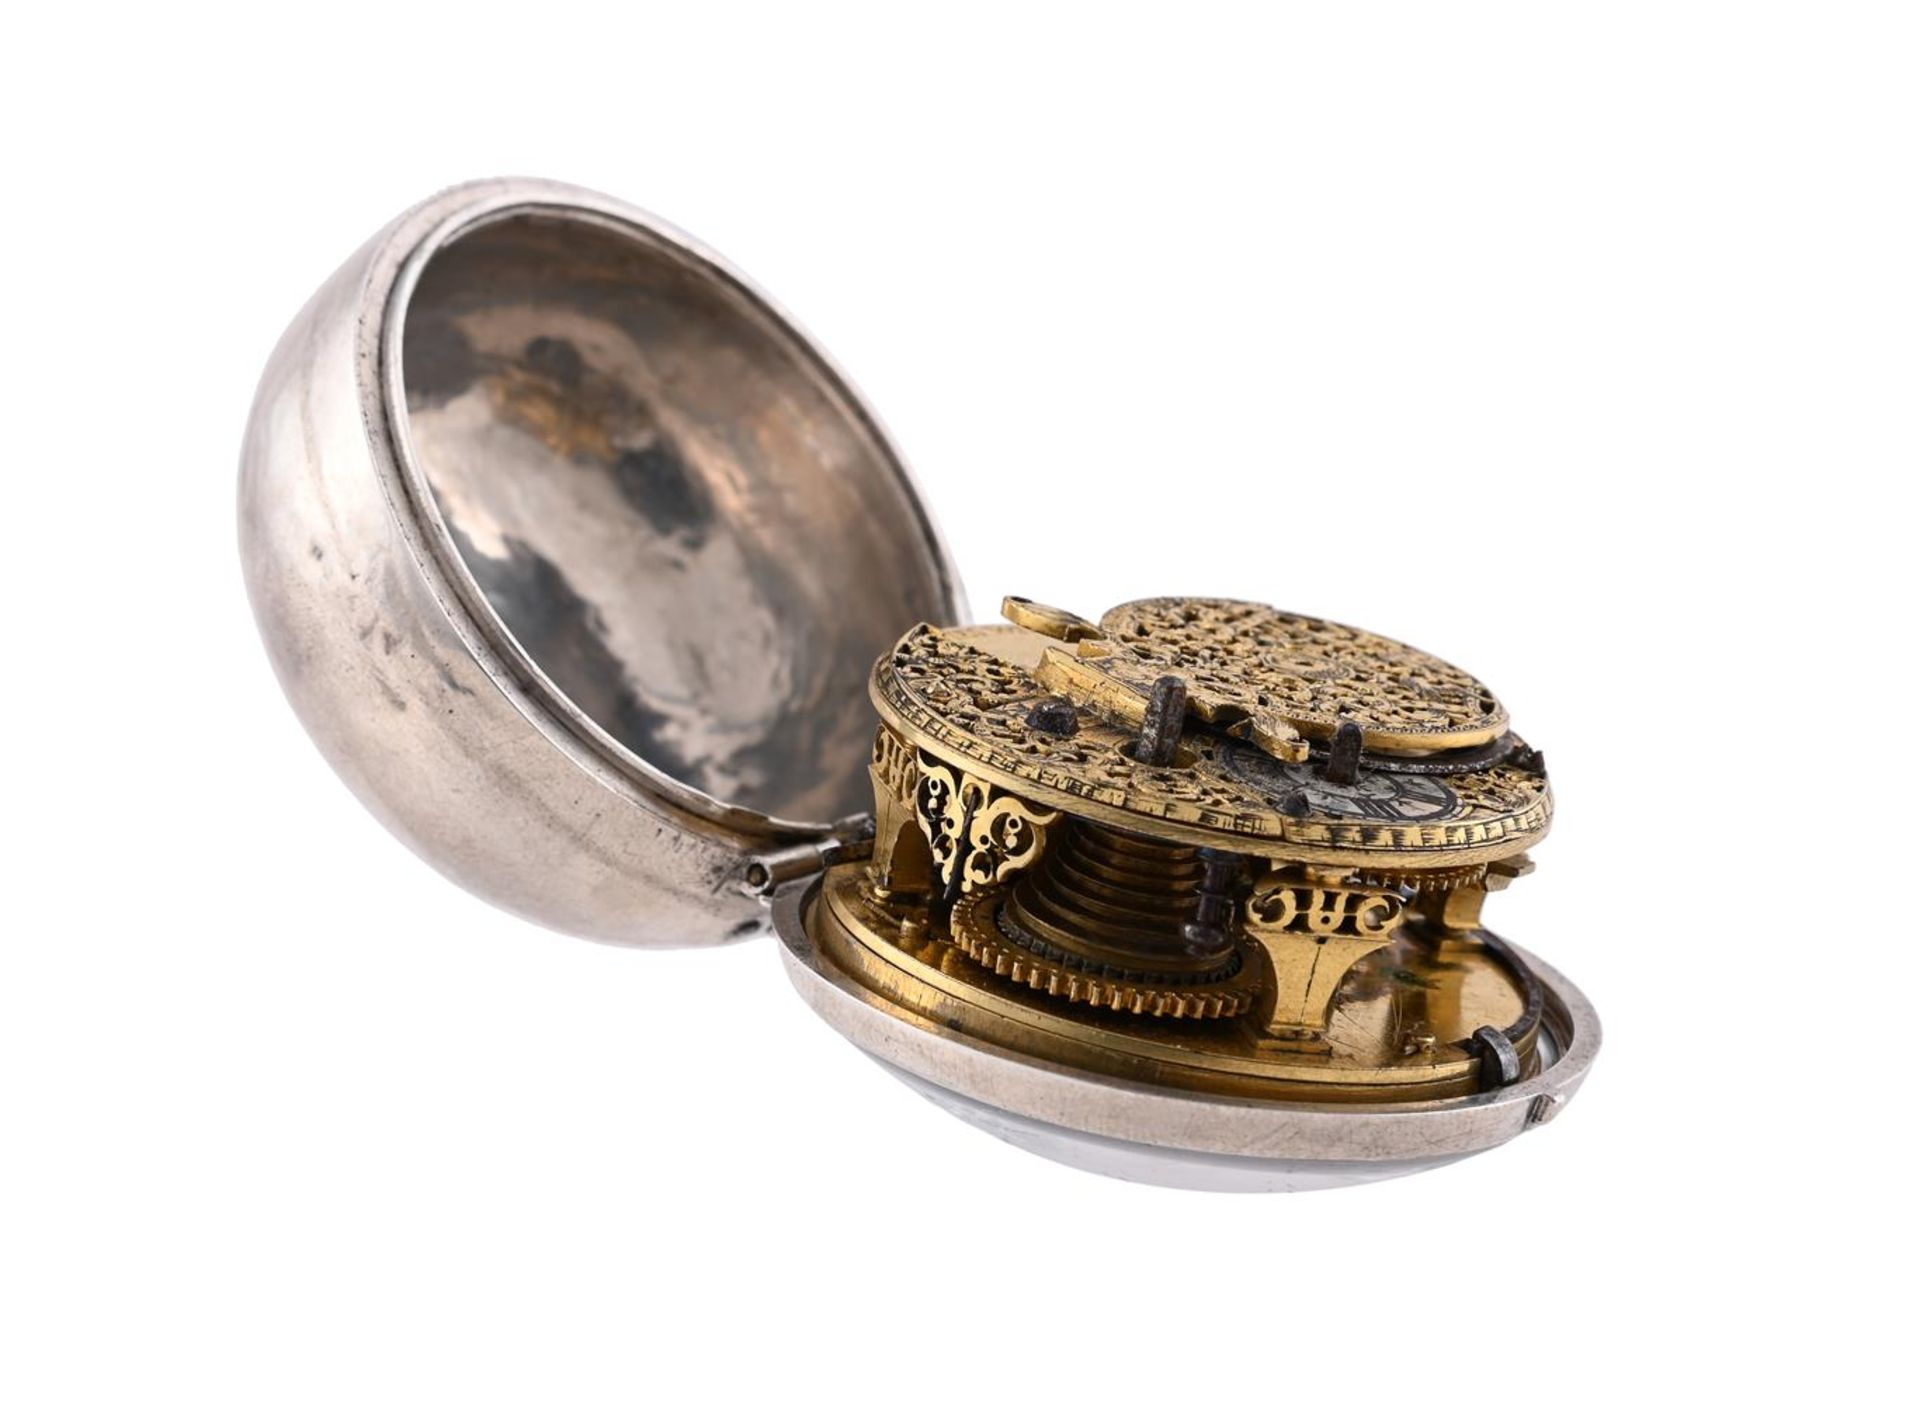 A RARE PROVINCIAL SILVER LARGER PAIR-CASED VERGE POCKET WATCH WITH CHAMPLEVE DIAL - Image 4 of 5